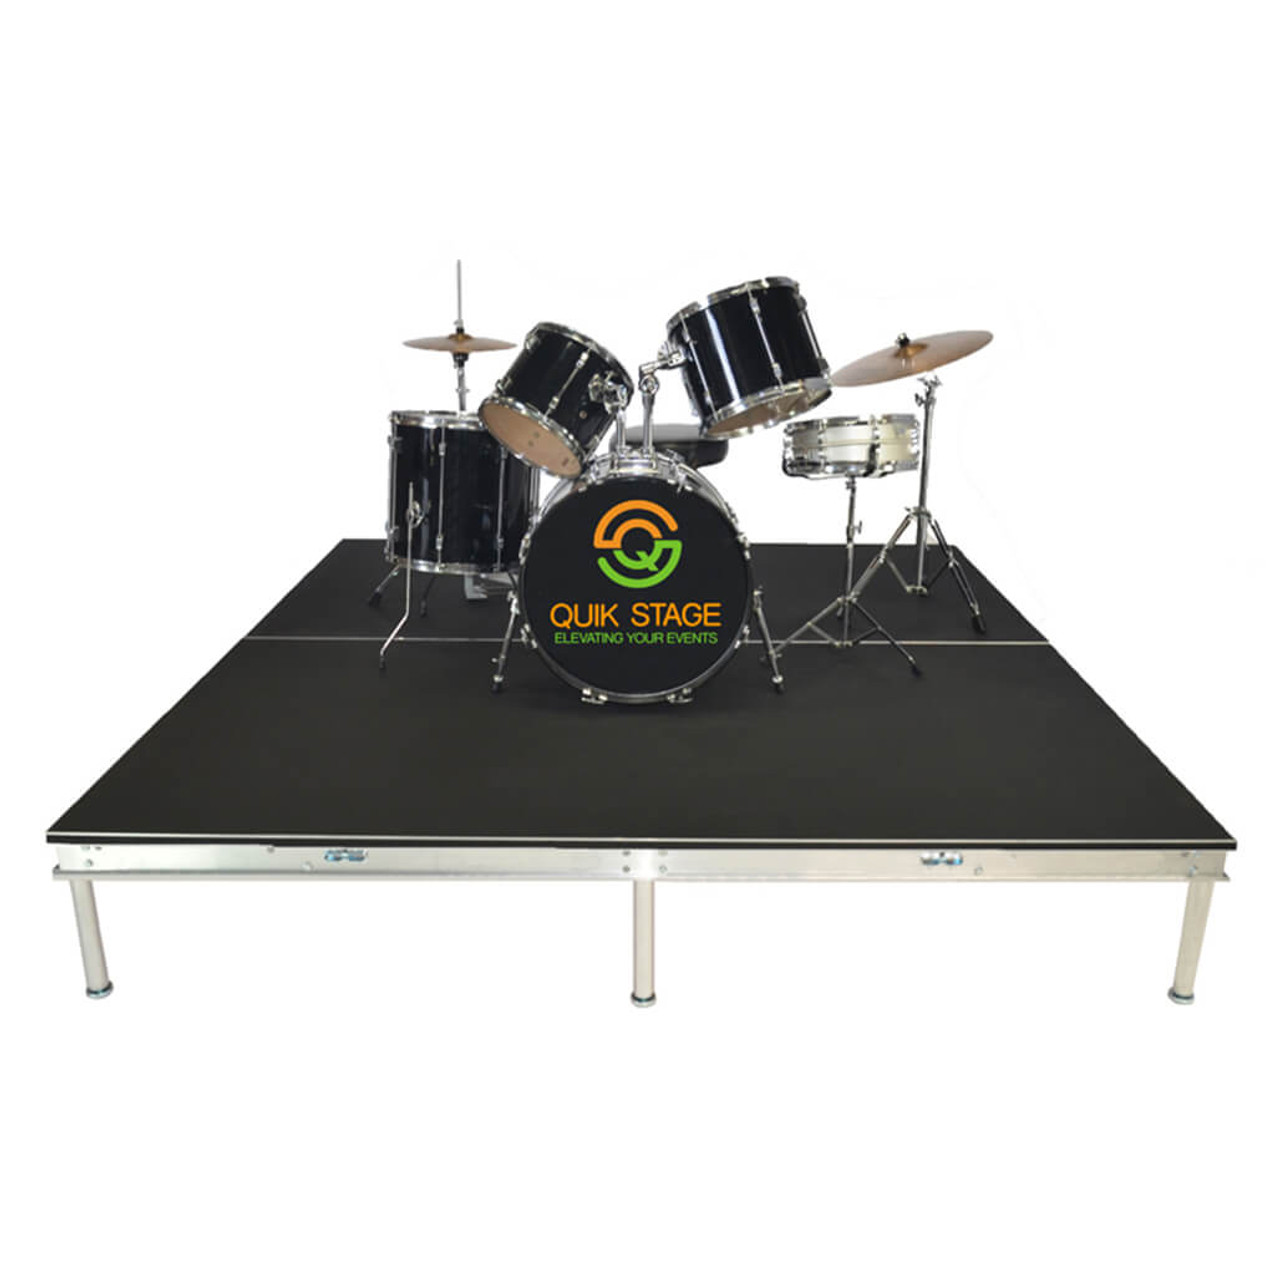 Quik Stage 12' x 44' High Portable Stage Package with Black Polyvinyl Non-Skid Surface. Additional Heights and Surfaces Available - Drum Riser without skirting